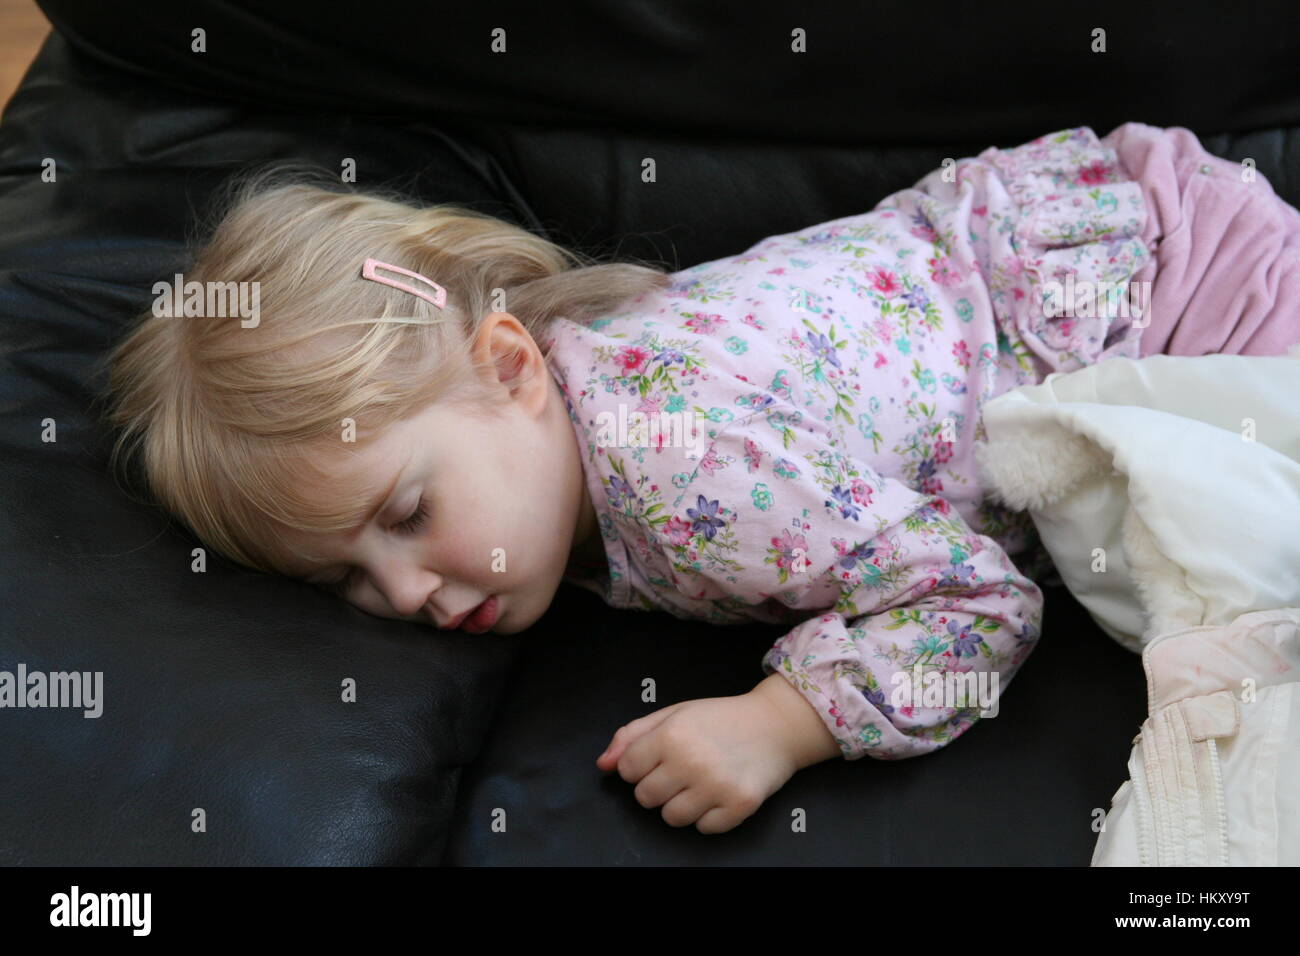 Sleeping toddler asleep in her clothes, sleeping on her tummy, exhausted concept, fast asleep, wrecked, long day concept tired concept Stock Photo